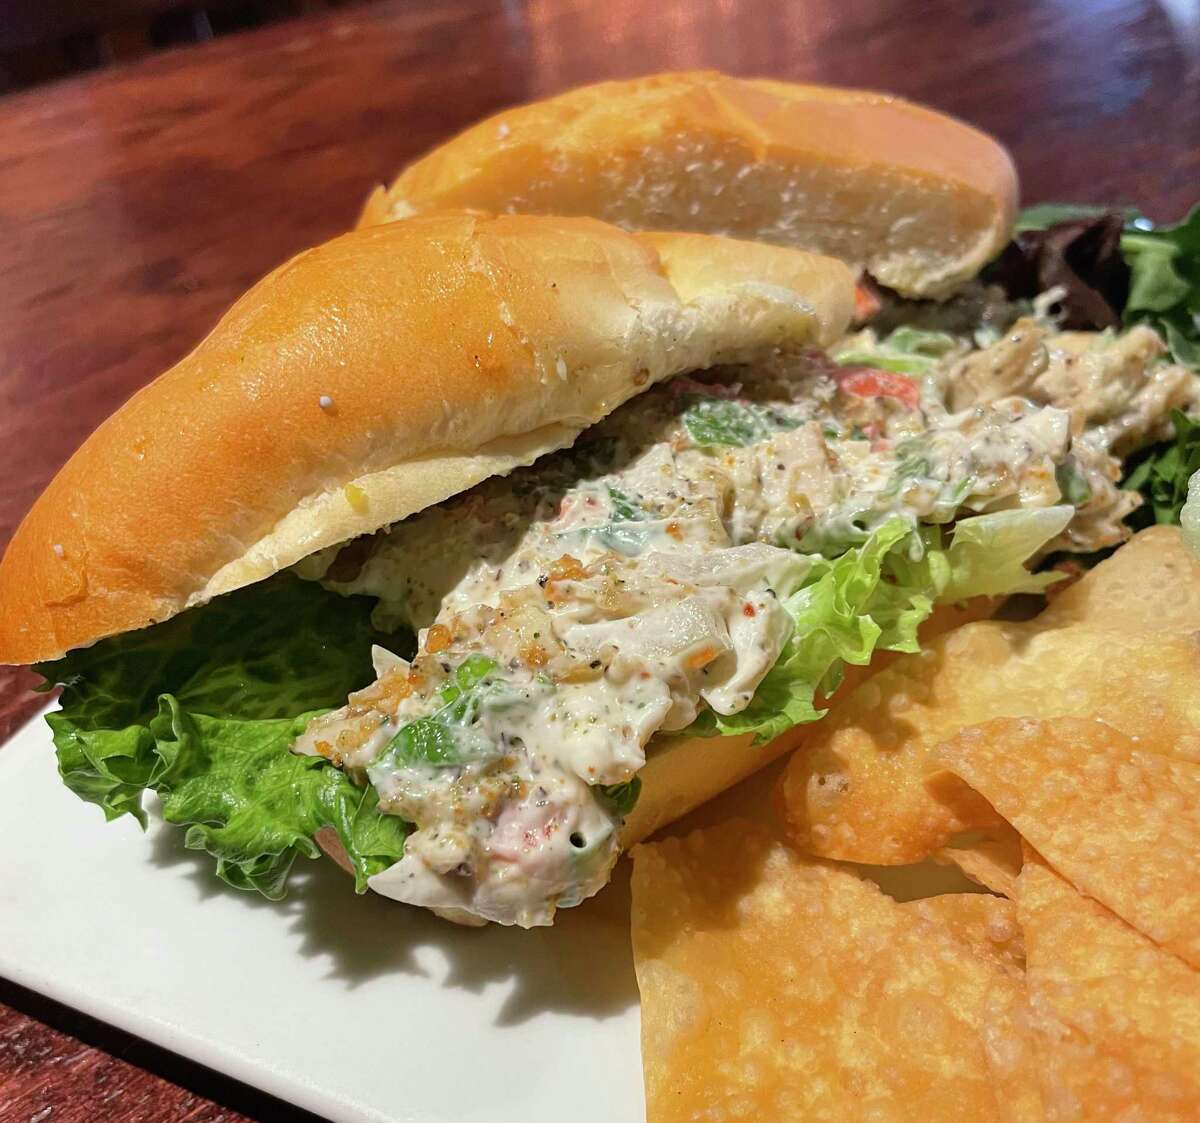 The chicken salad sandwich at Pacific Moon Bar & Grill